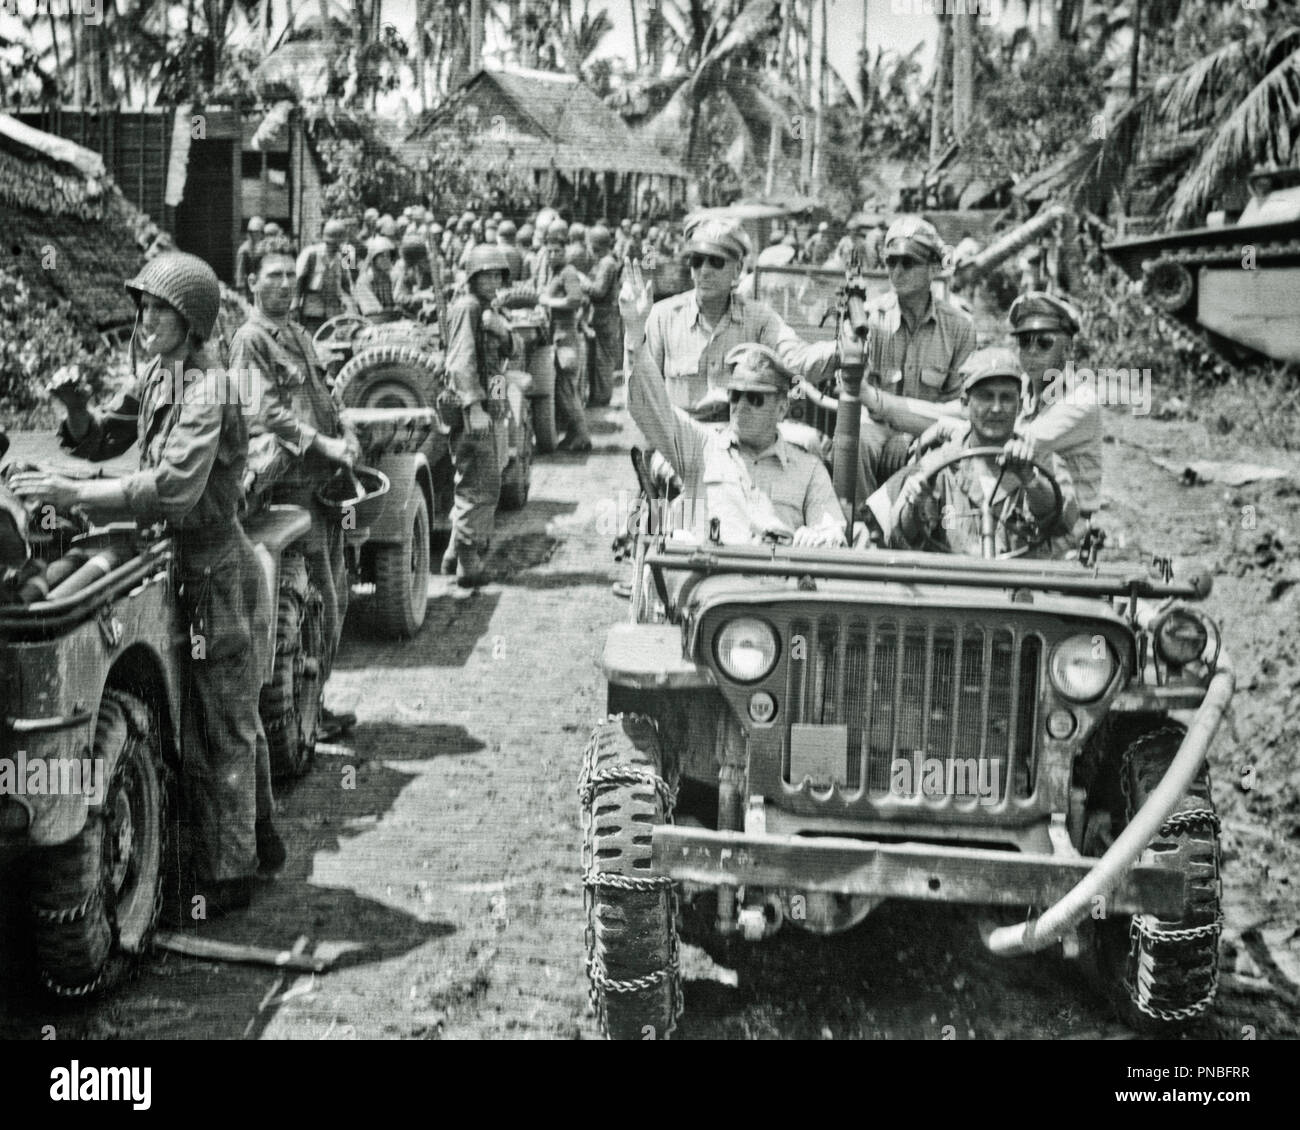 1940s GENERAL MacARTHUR RIDING IN JEEP INSPECTS WAR IN THE PACIFIC THEATER TROOPS OCTOBER 29 1944 - asp fwp1942 ASP001 HARS PERSONS INSPIRATION UNITED STATES OF AMERICA MALES RISK CONFIDENCE TRANSPORTATION B&W FREEDOM SUCCESS WIDE ANGLE STRENGTH VICTORY STRATEGY COURAGE EXCITEMENT LEADERSHIP POWERFUL PROGRESS WORLD WARS PRIDE WORLD WAR WORLD WAR TWO WORLD WAR II AUTHORITY OCCUPATIONS TROOPS UNIFORMS CONNECTION STYLISH WORLD WAR 2 29 OCTOBER TOGETHERNESS 1944 BLACK AND WHITE CAUCASIAN ETHNICITY OLD FASHIONED Stock Photo